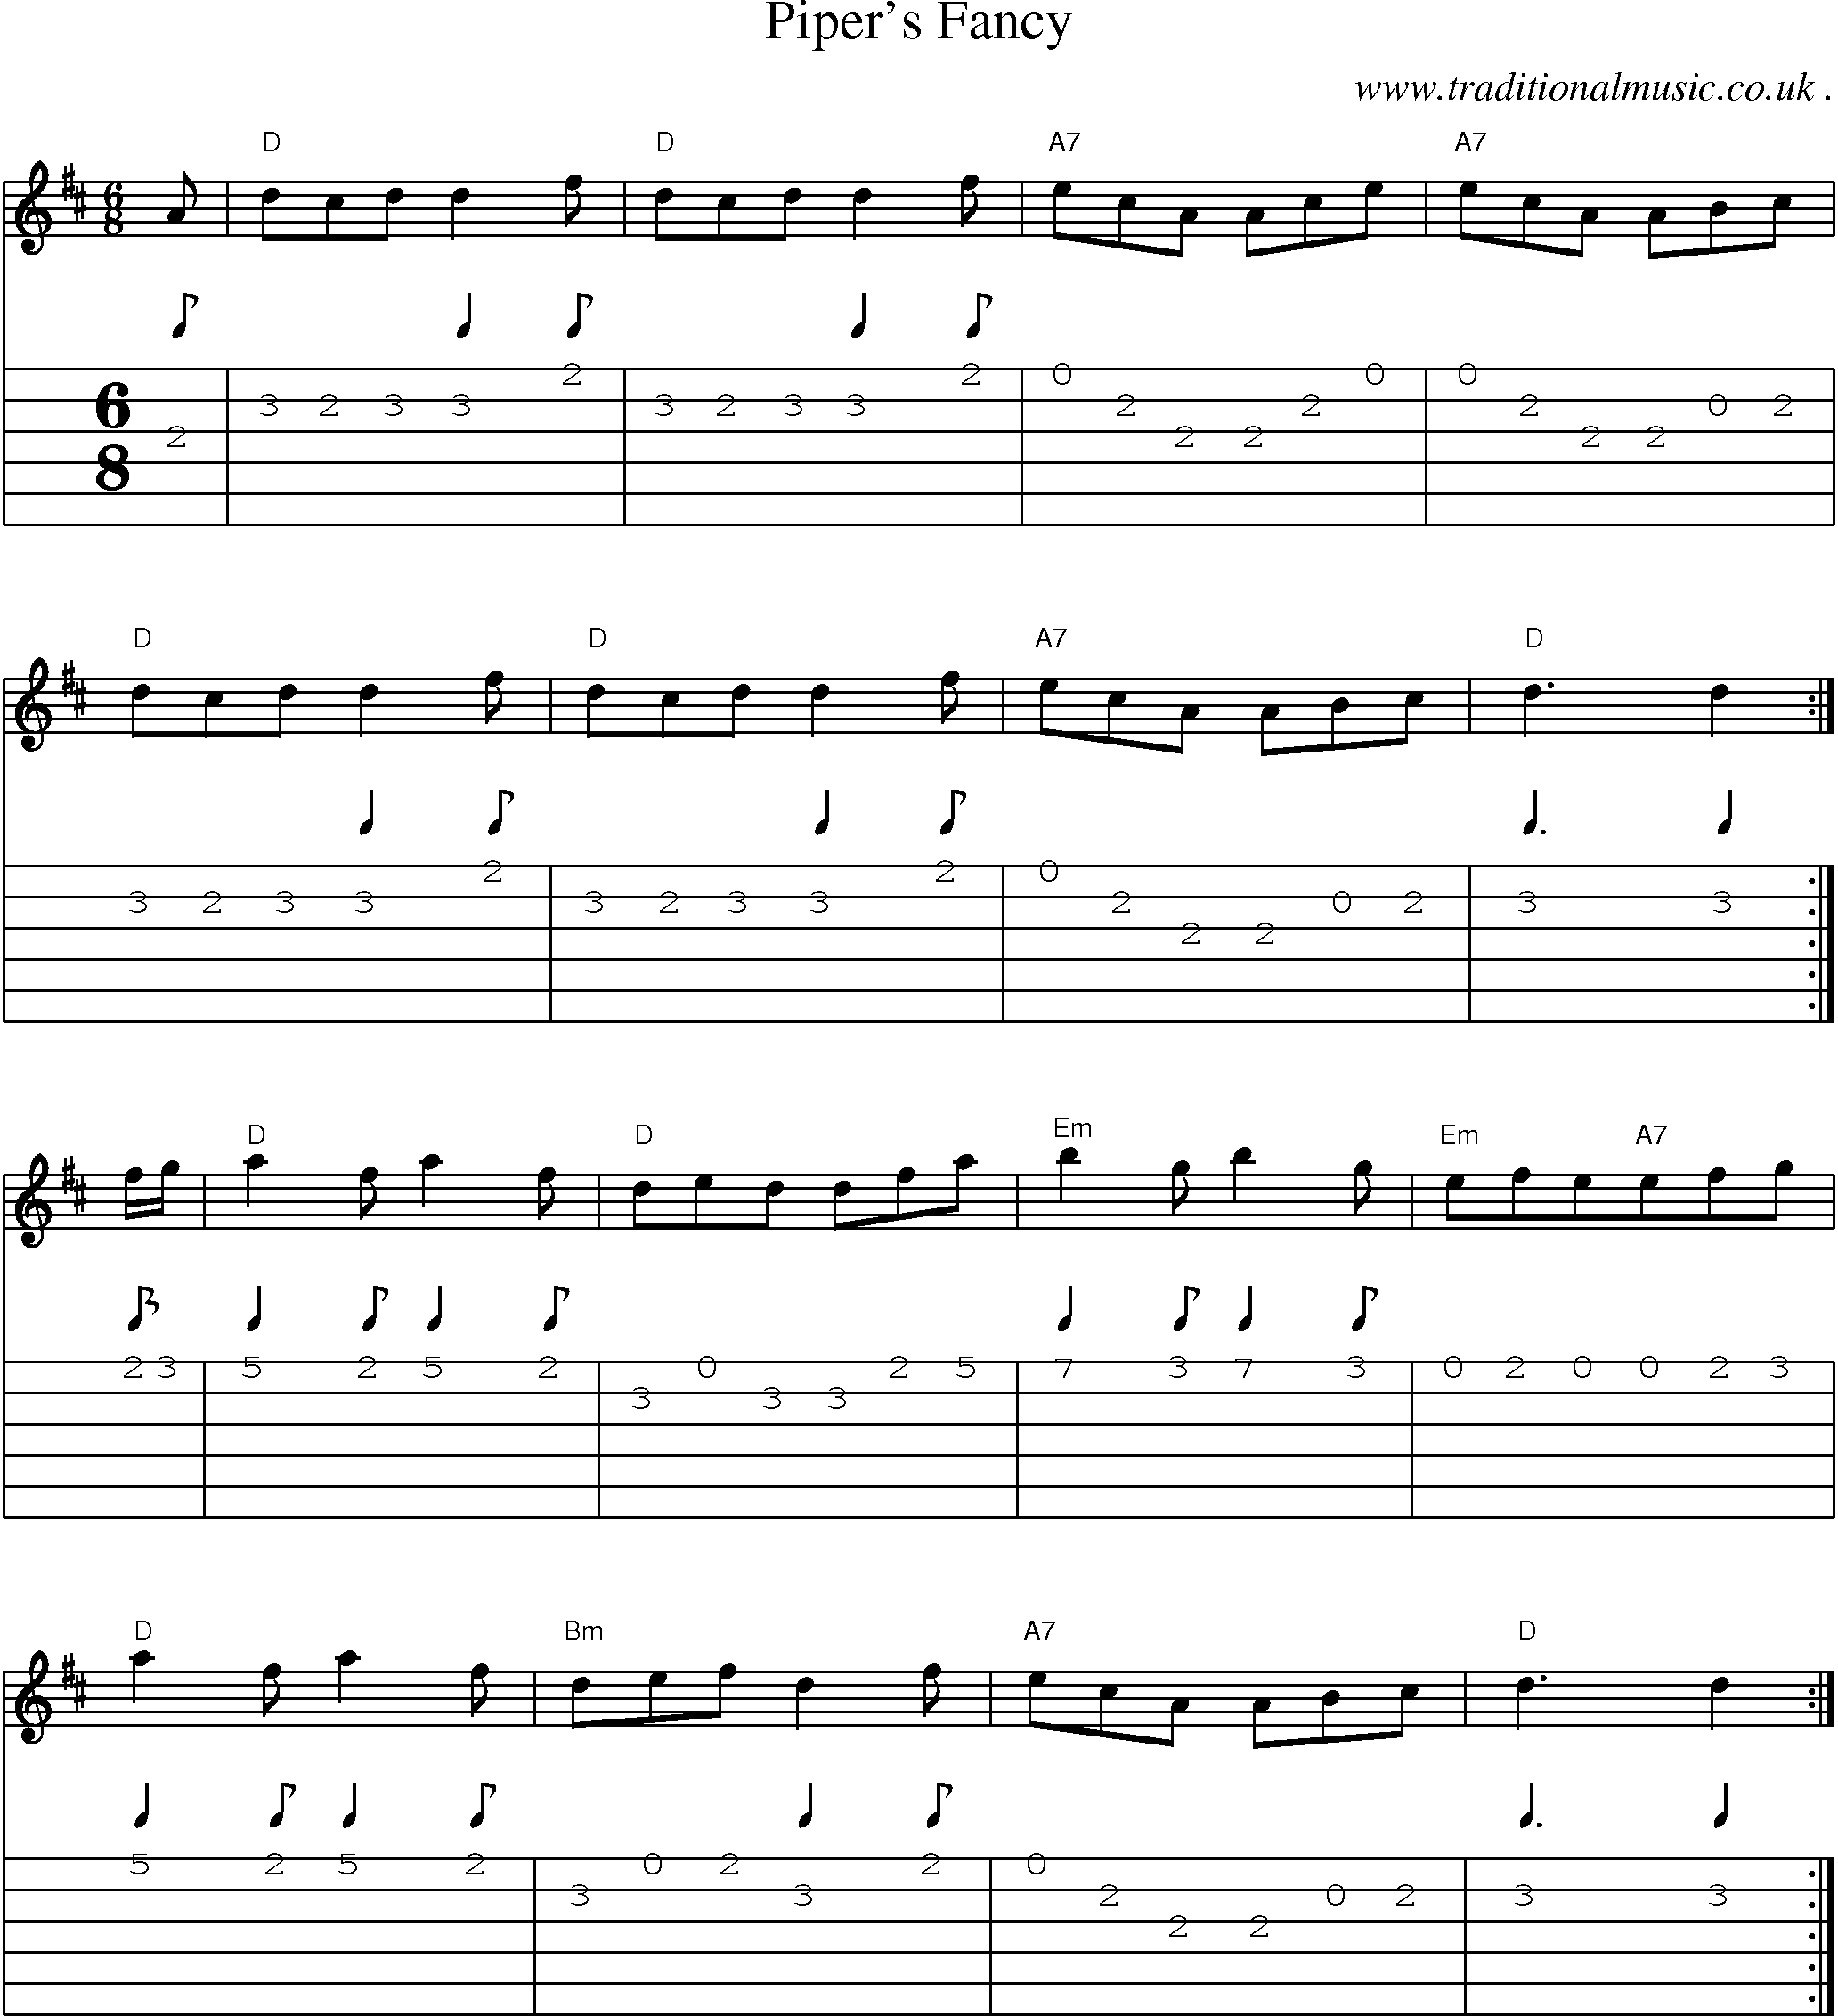 Sheet-Music and Guitar Tabs for Pipers Fancy